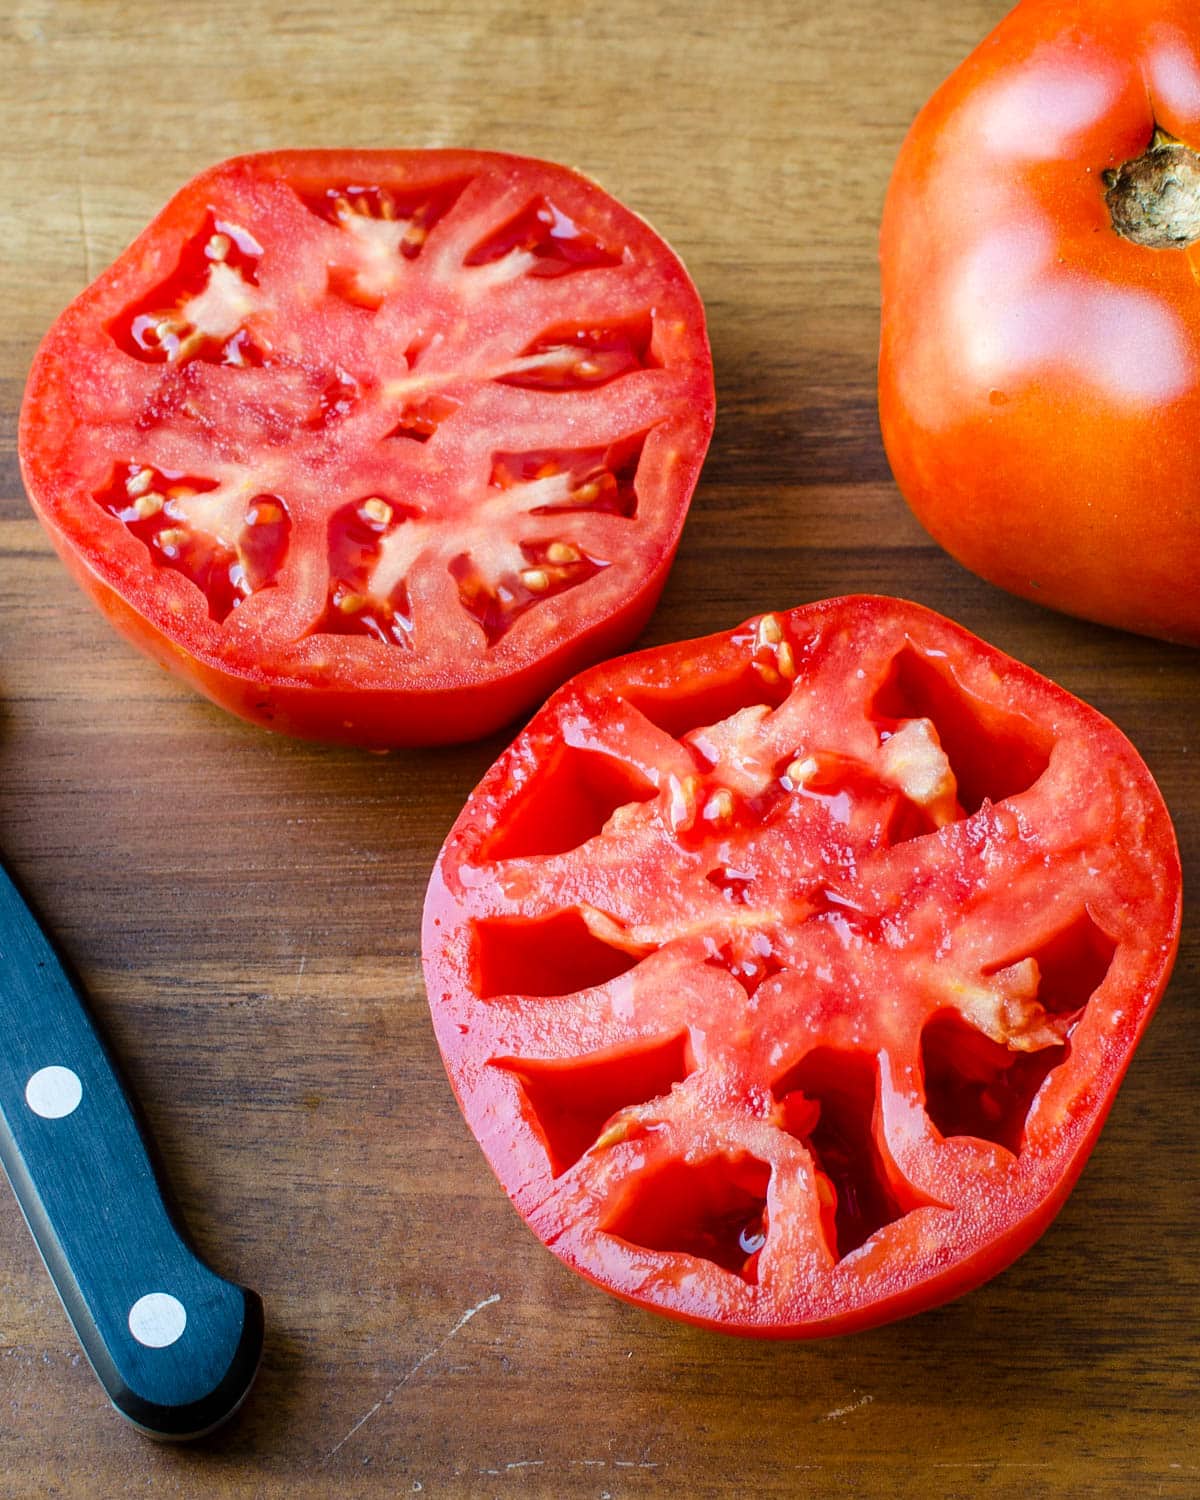 Slicing a tomato in half and deseeding it.